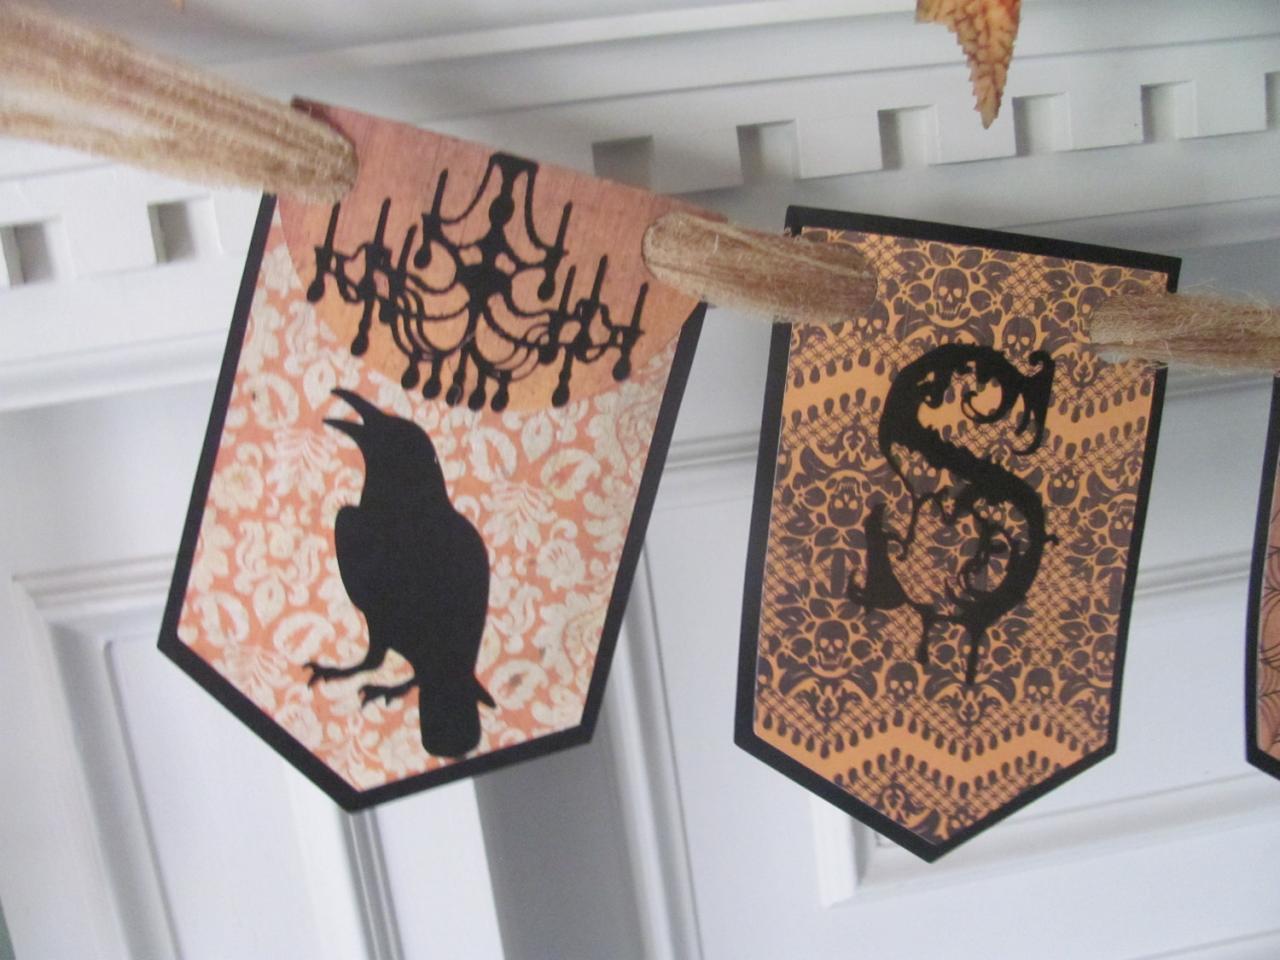 Victorian Inspired "spooky" Halloween Banner Featuring Gothic Style Lettering With Ravens & Chandaliers